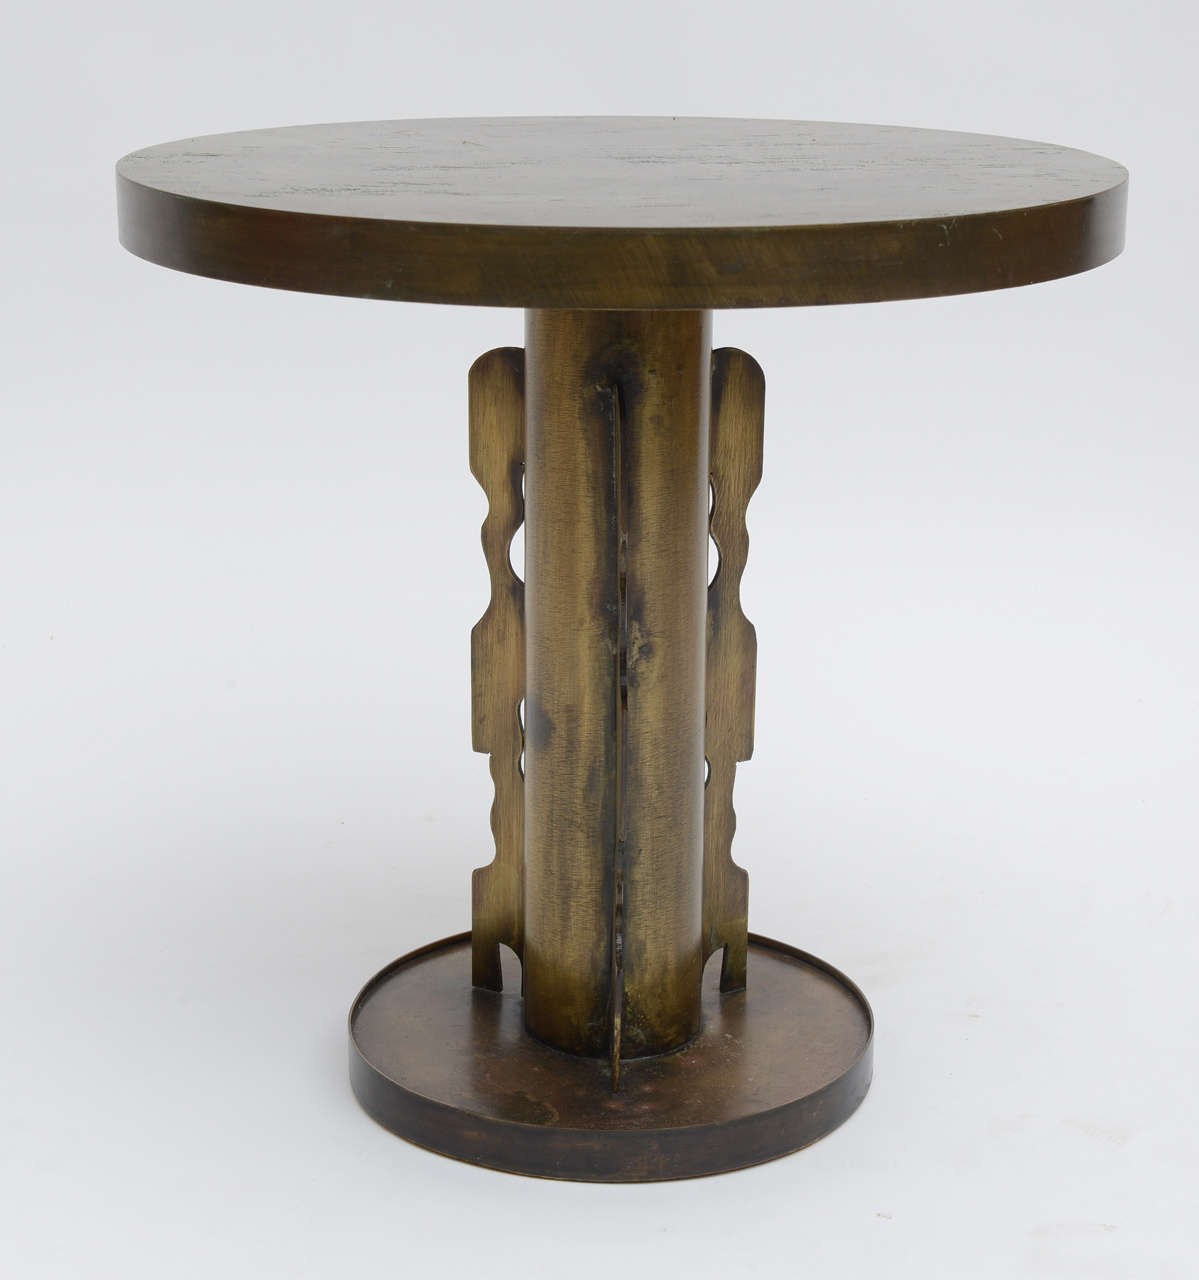 Great side table by Philip & Kelvin Laverne with a simple design on top.